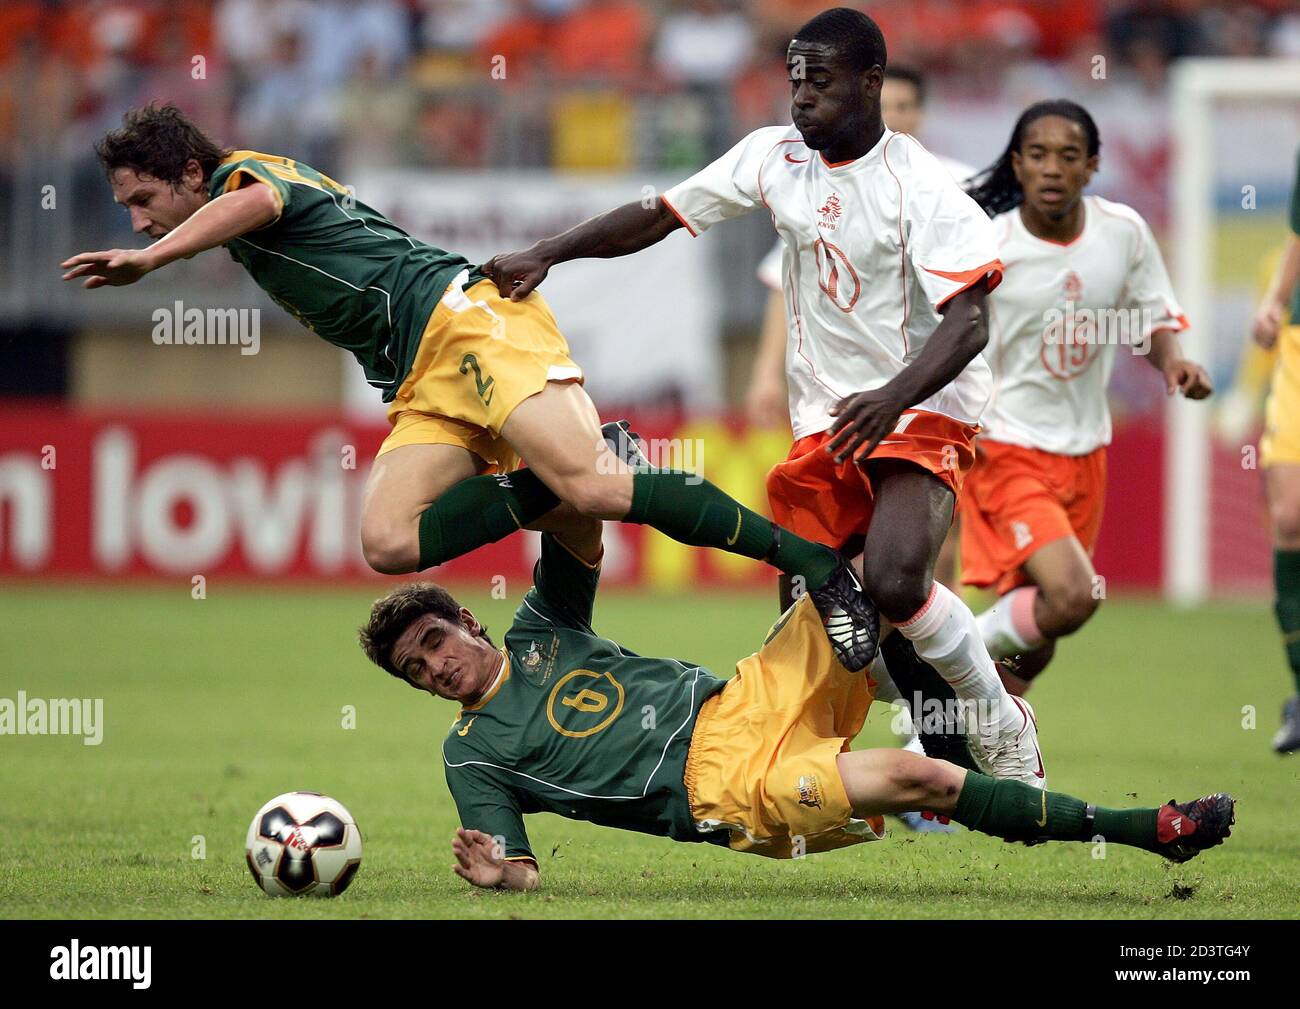 Netherland's Quincy challenges Australia's Milligan and Musialik during their World Youth Championships match in Kerkrade.  Netherland's Quincy Owusu Abeyie (2nd R ) challenges Australia's Mark Milligan (L) and Stuart Musialik (2nd L ) as Dutch Urby Emanuelson looks on during their Group A FIFA World Youth Championships match at The Parkstad Stadium in Kerkrade, the Netherlands, June15, 2005. REUTERS/Jerry Lampen Banque D'Images